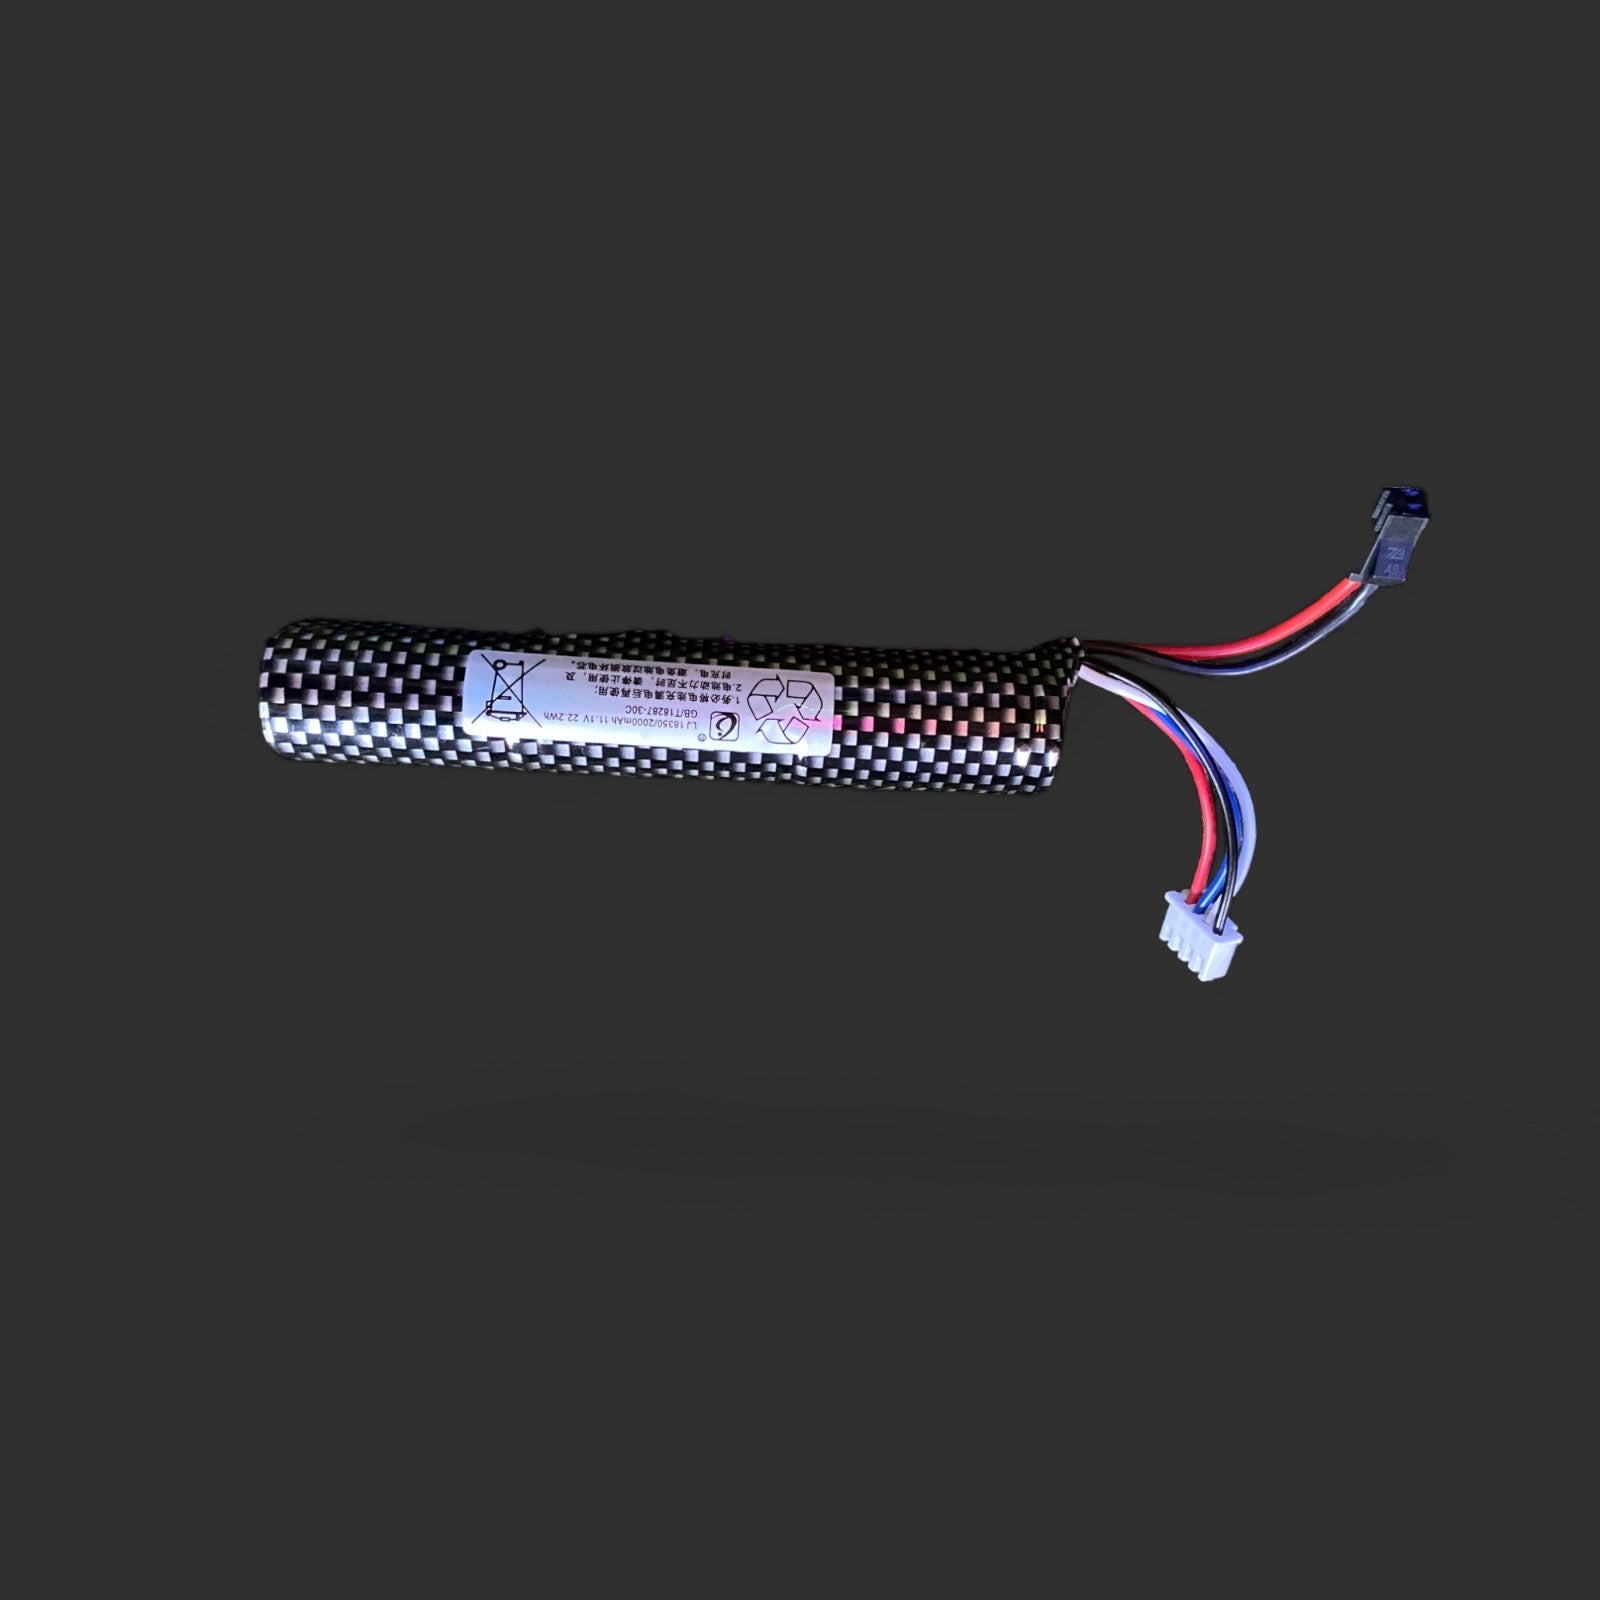 A BlasterMaster 11.1V 18350 2000mAh SM2 30C long skin battery isolated on a gray background, featuring a wrapped cell and connected wires with plastic connectors.